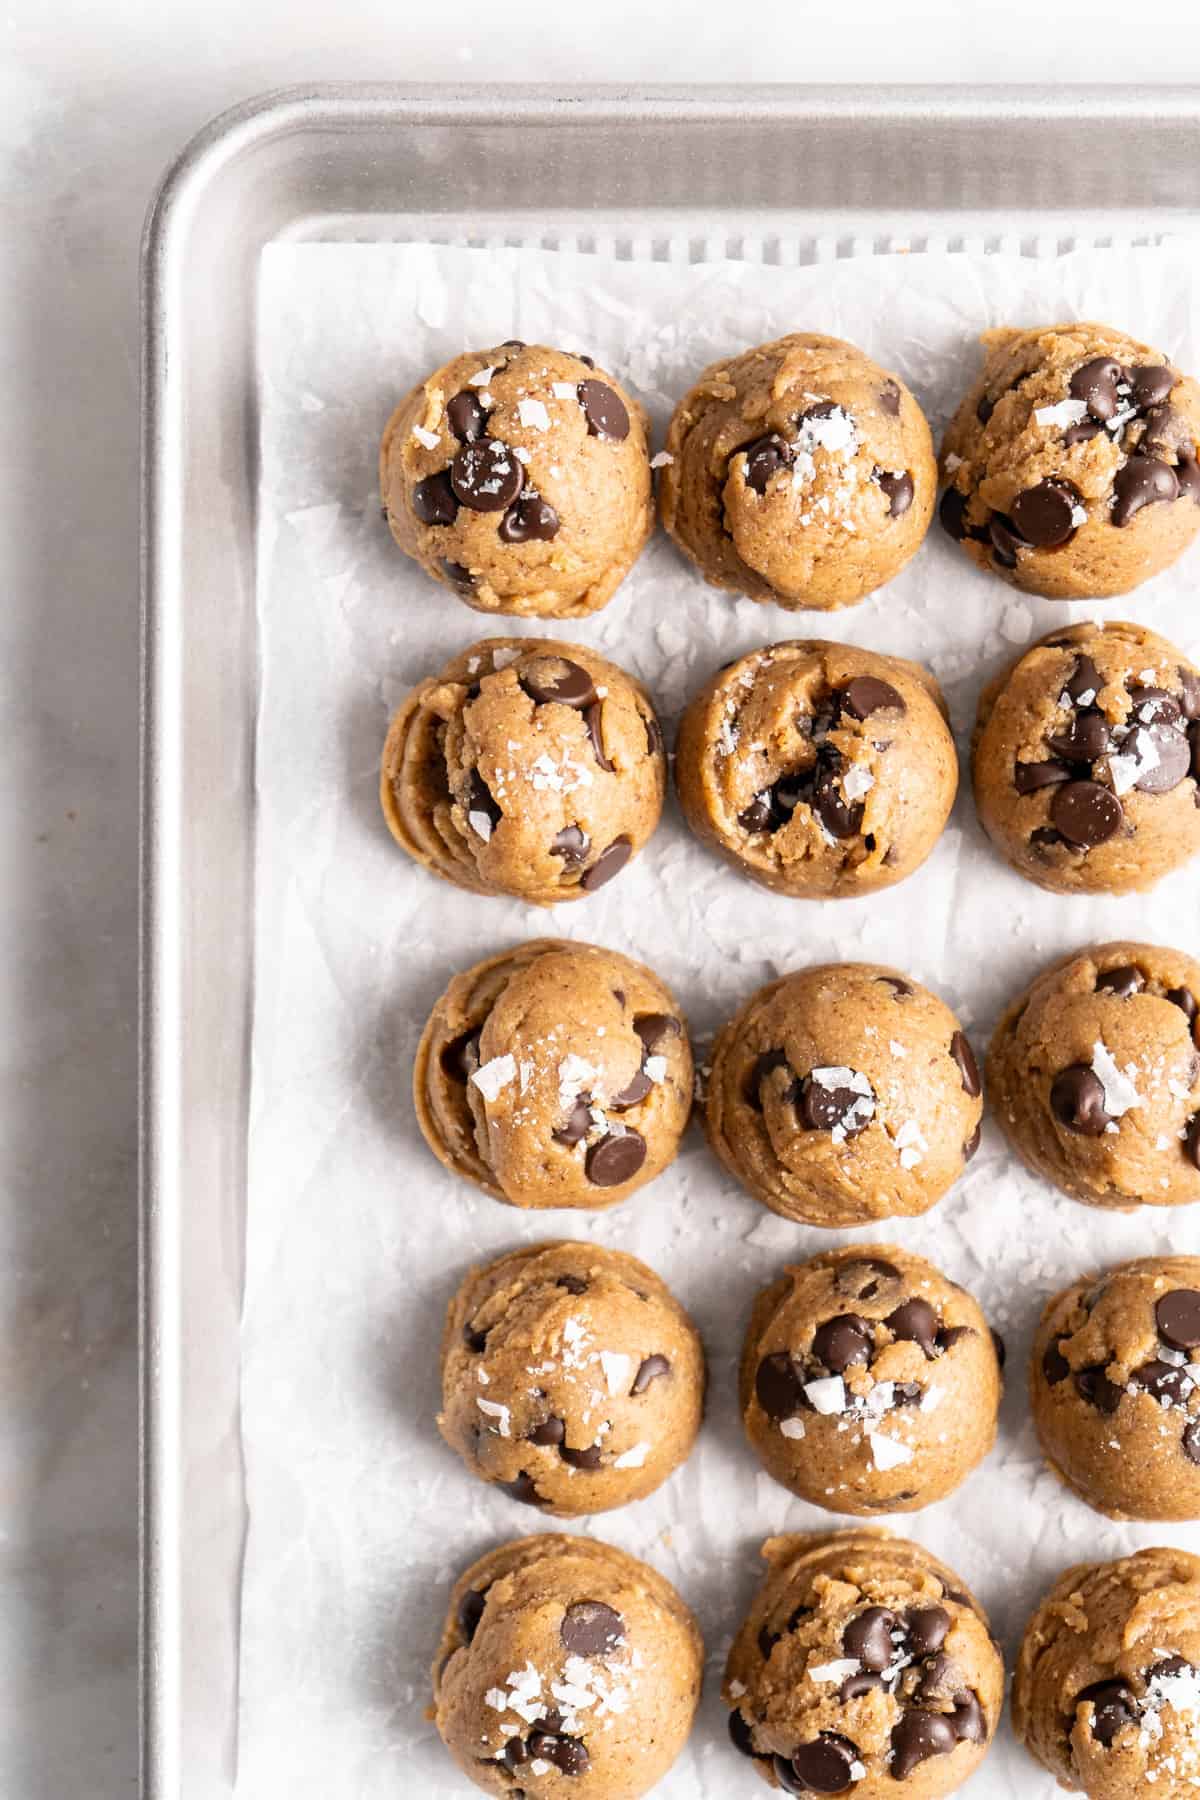 Overhead view of cookie dough balls arranged on parchment-lined baking sheet